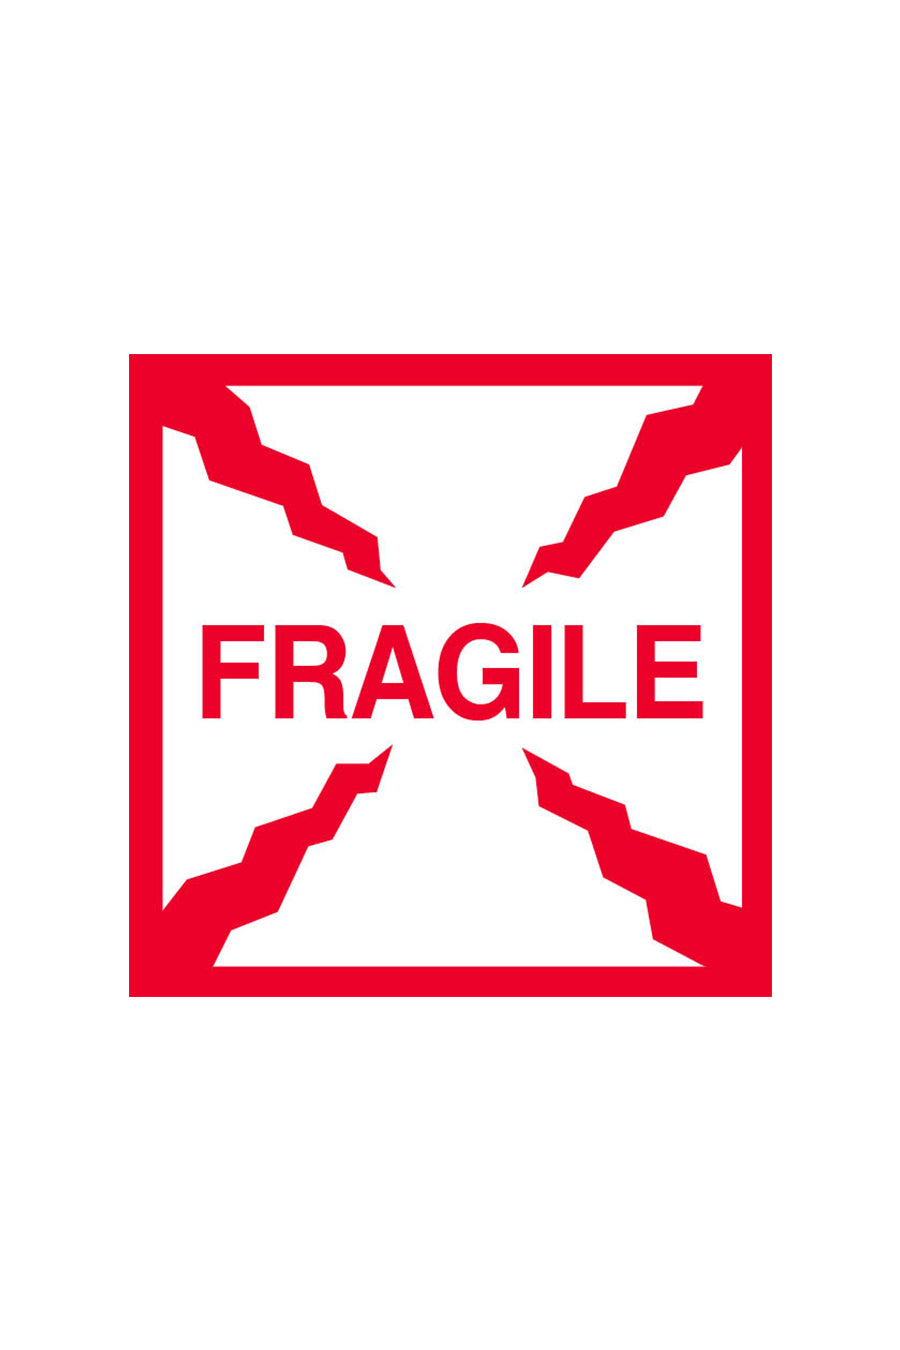 "Fragile", 4" x 4", Red/White, 500 Labels/Roll